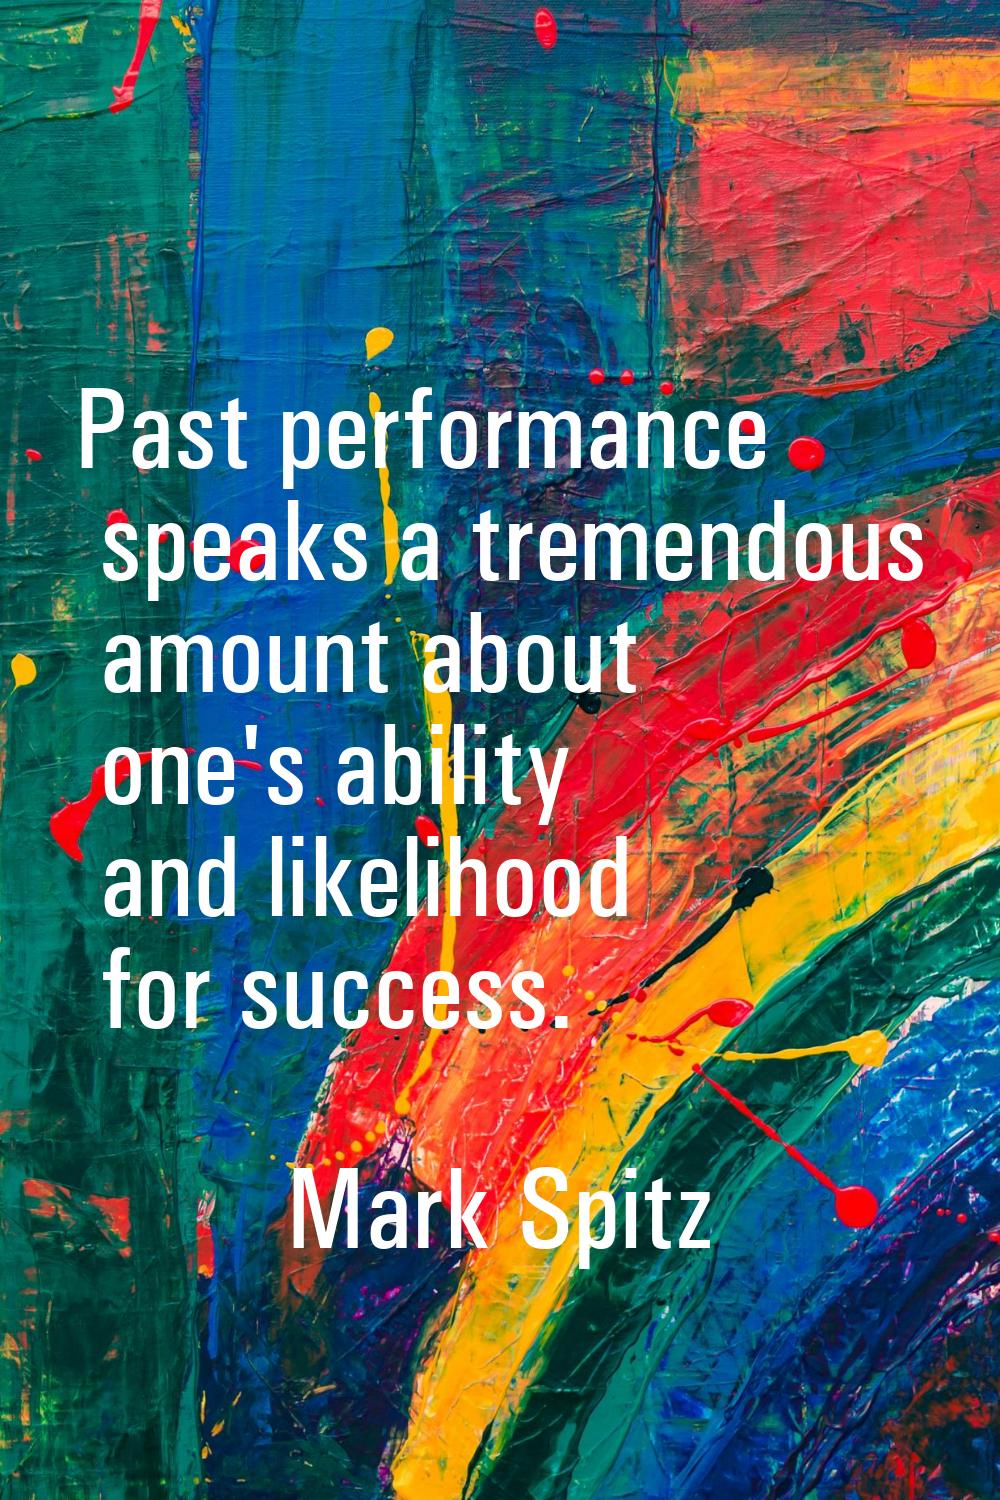 Past performance speaks a tremendous amount about one's ability and likelihood for success.